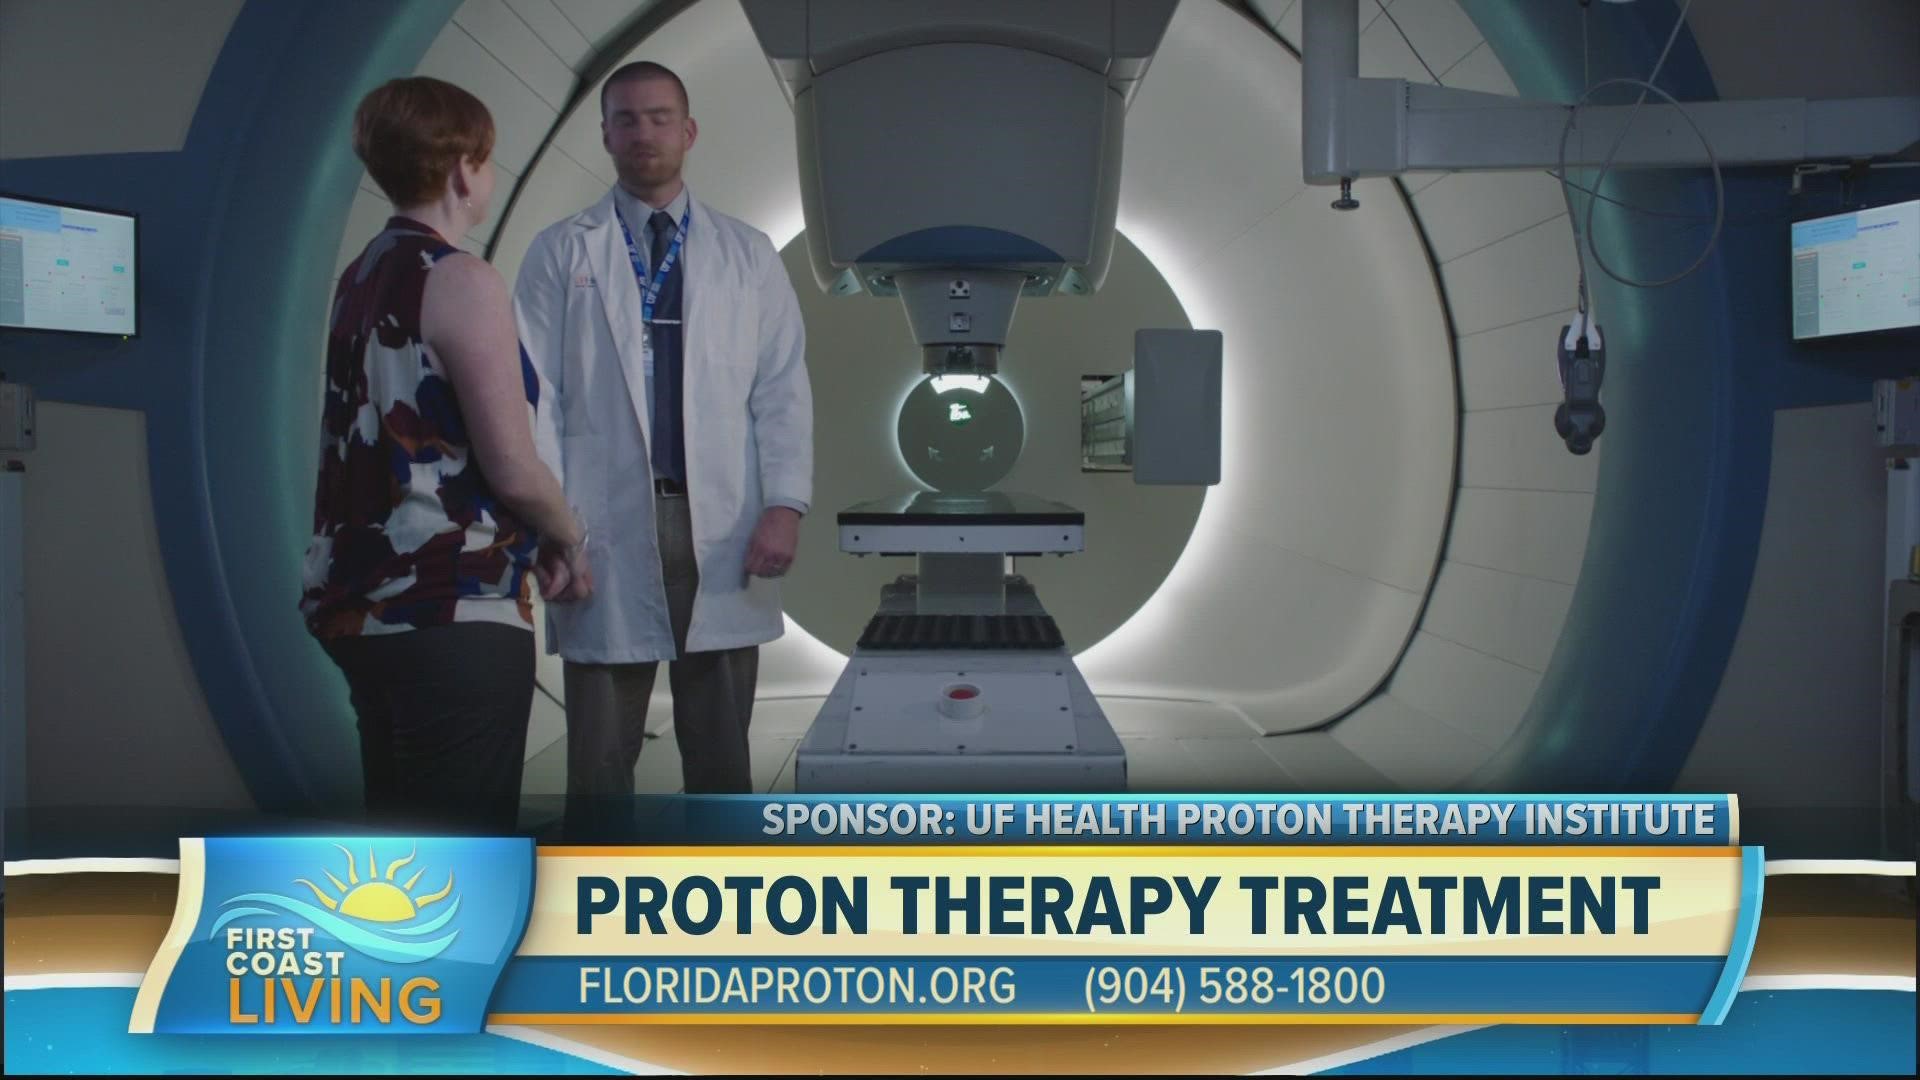 The Medical Director of the UF Health Proton Therapy Institute, Dr. Nancy P. Mendenhall shares how proton therapy works and who may be a good candidate.